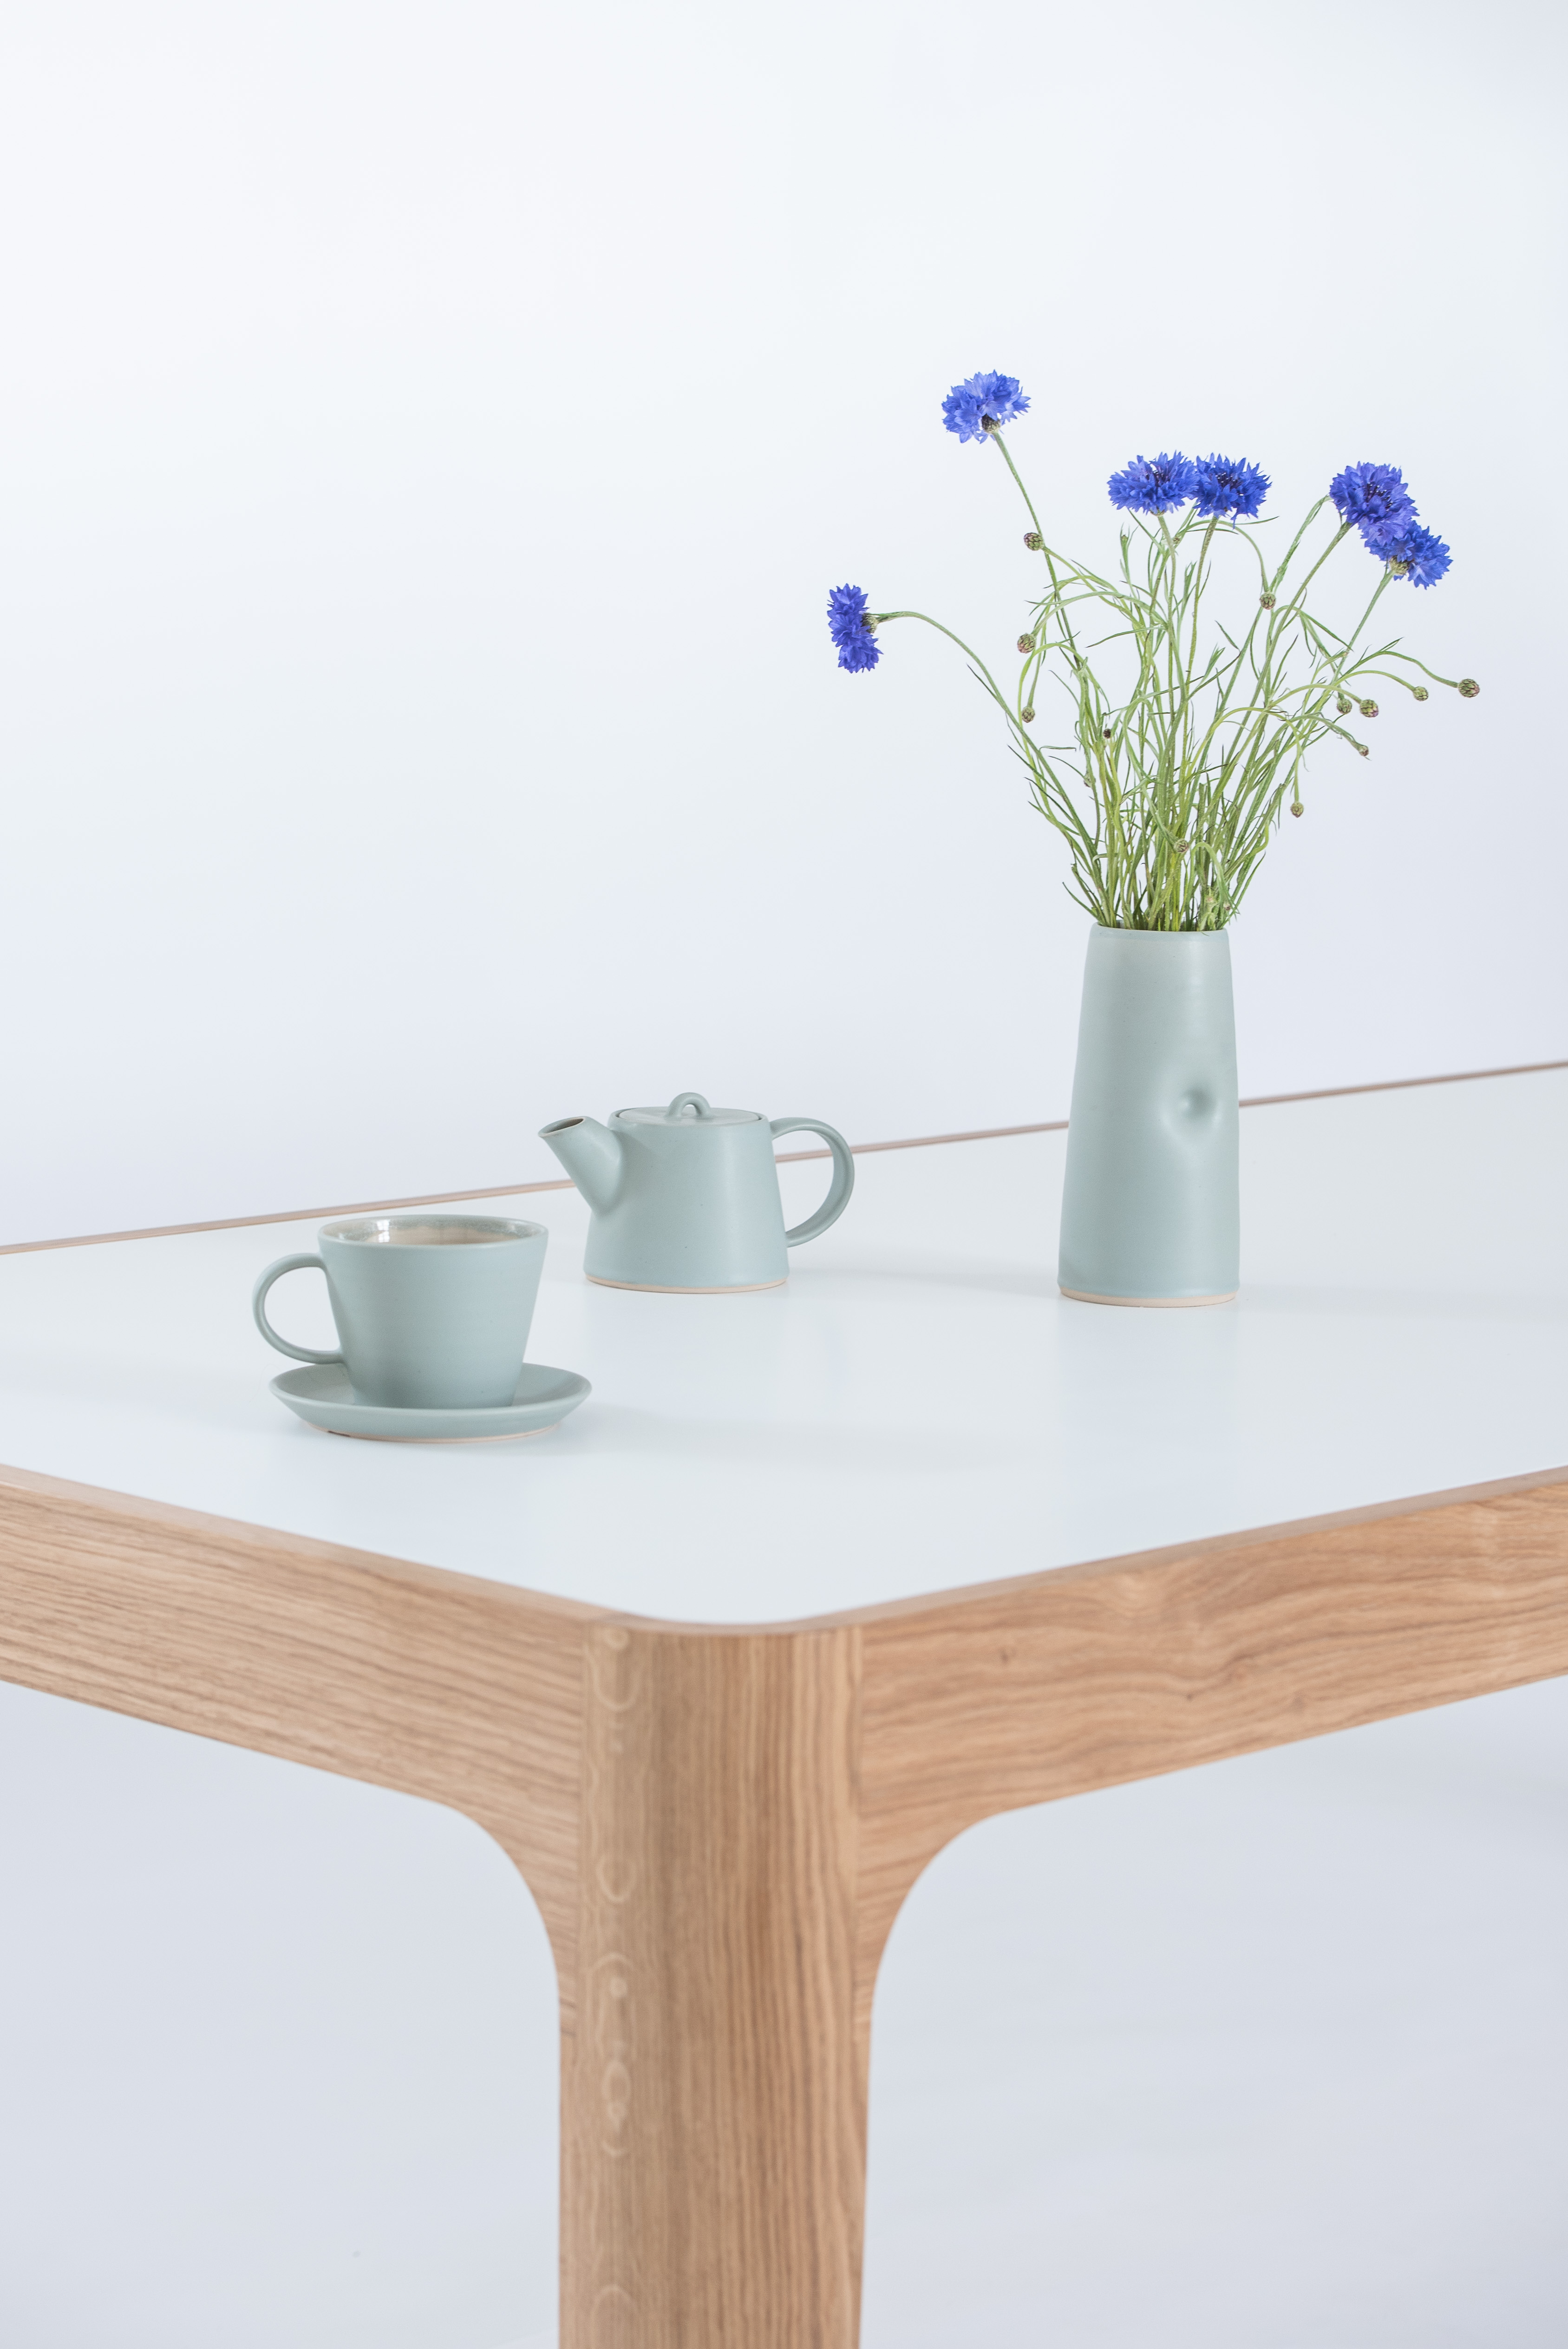 Jack Trench Bespoke Furniture | JT Curved Dining Table